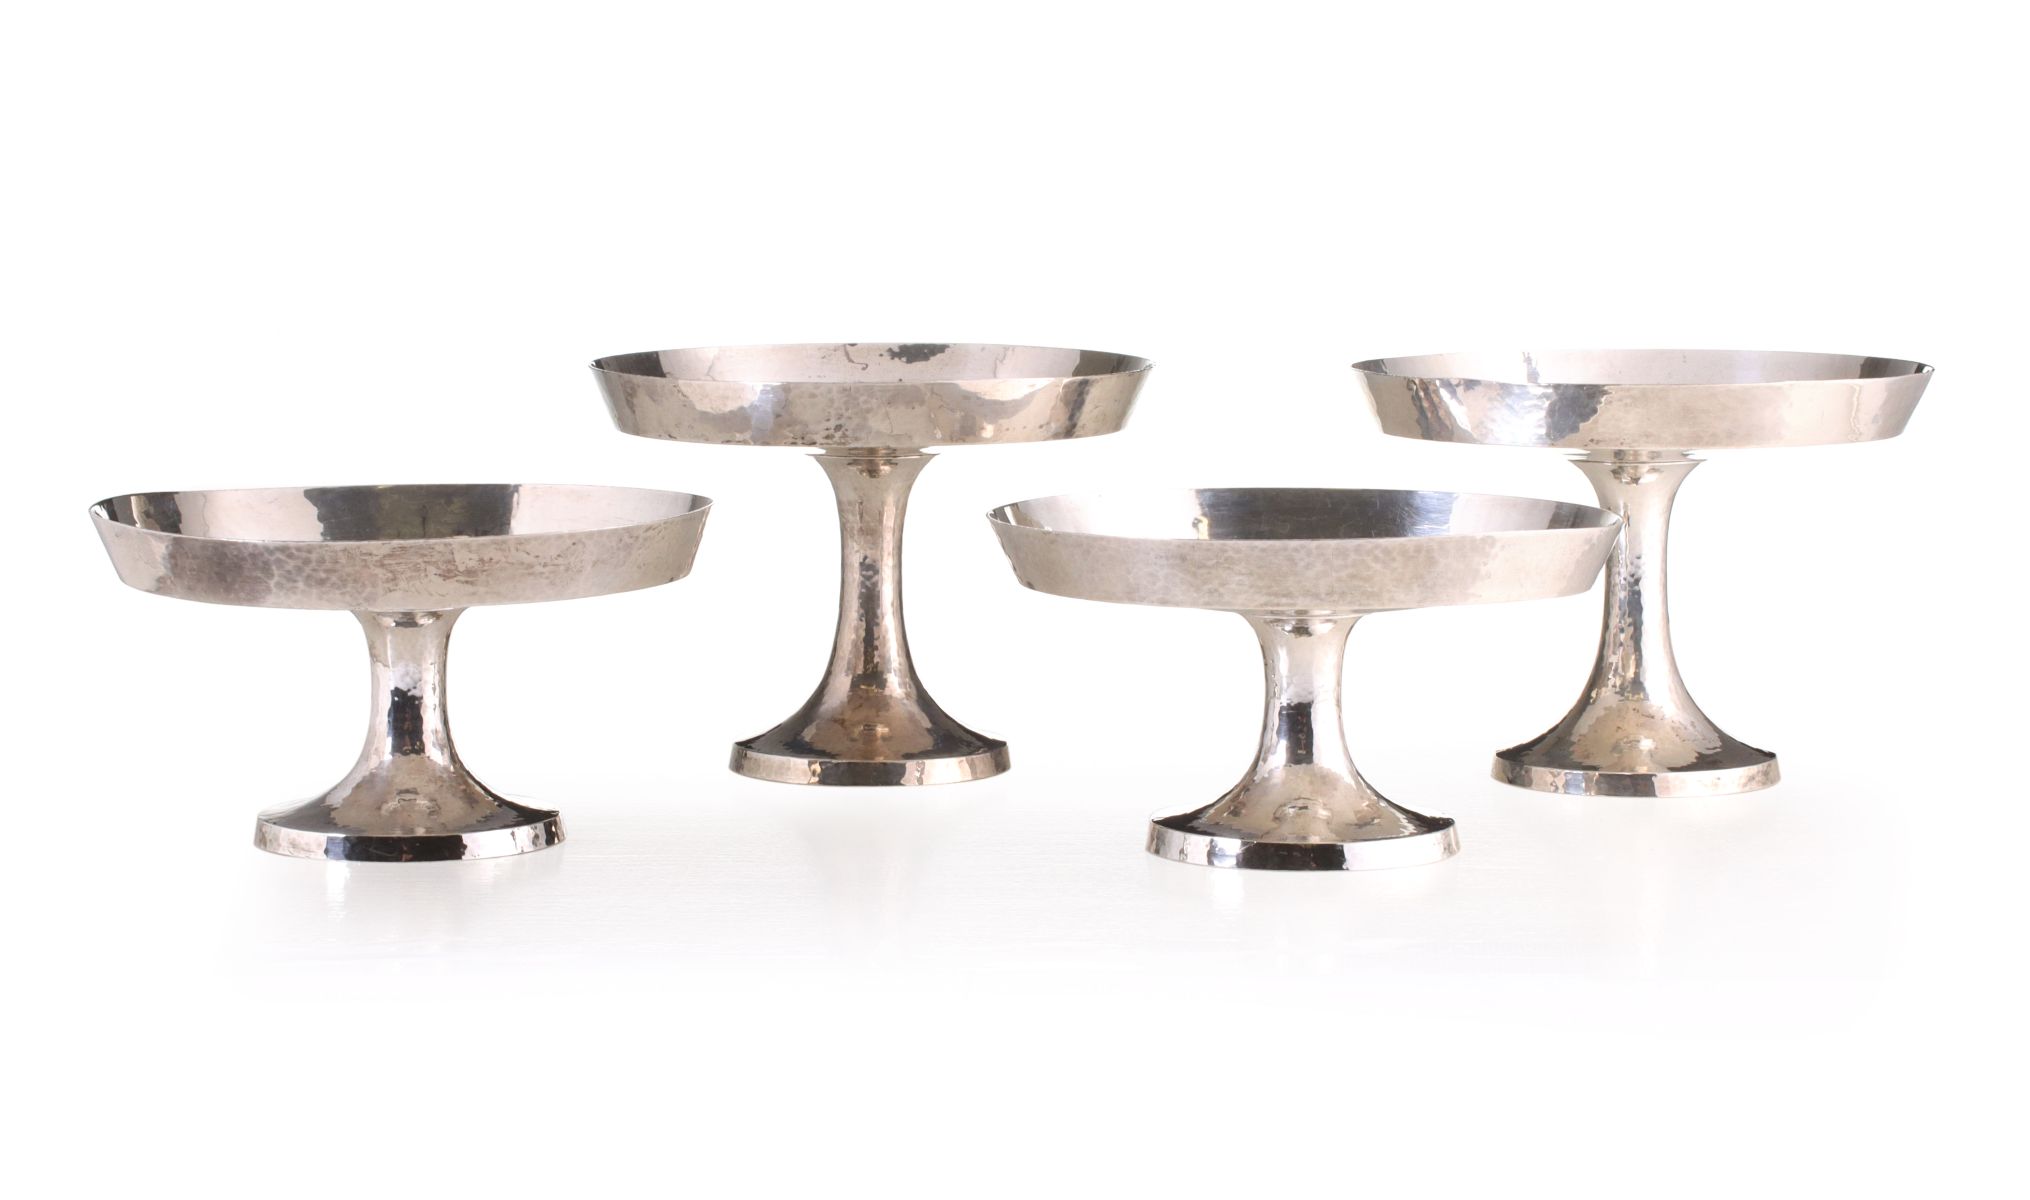 FOUR HAMMERED STERLING TAZZA STAMPED SHREVE & CO